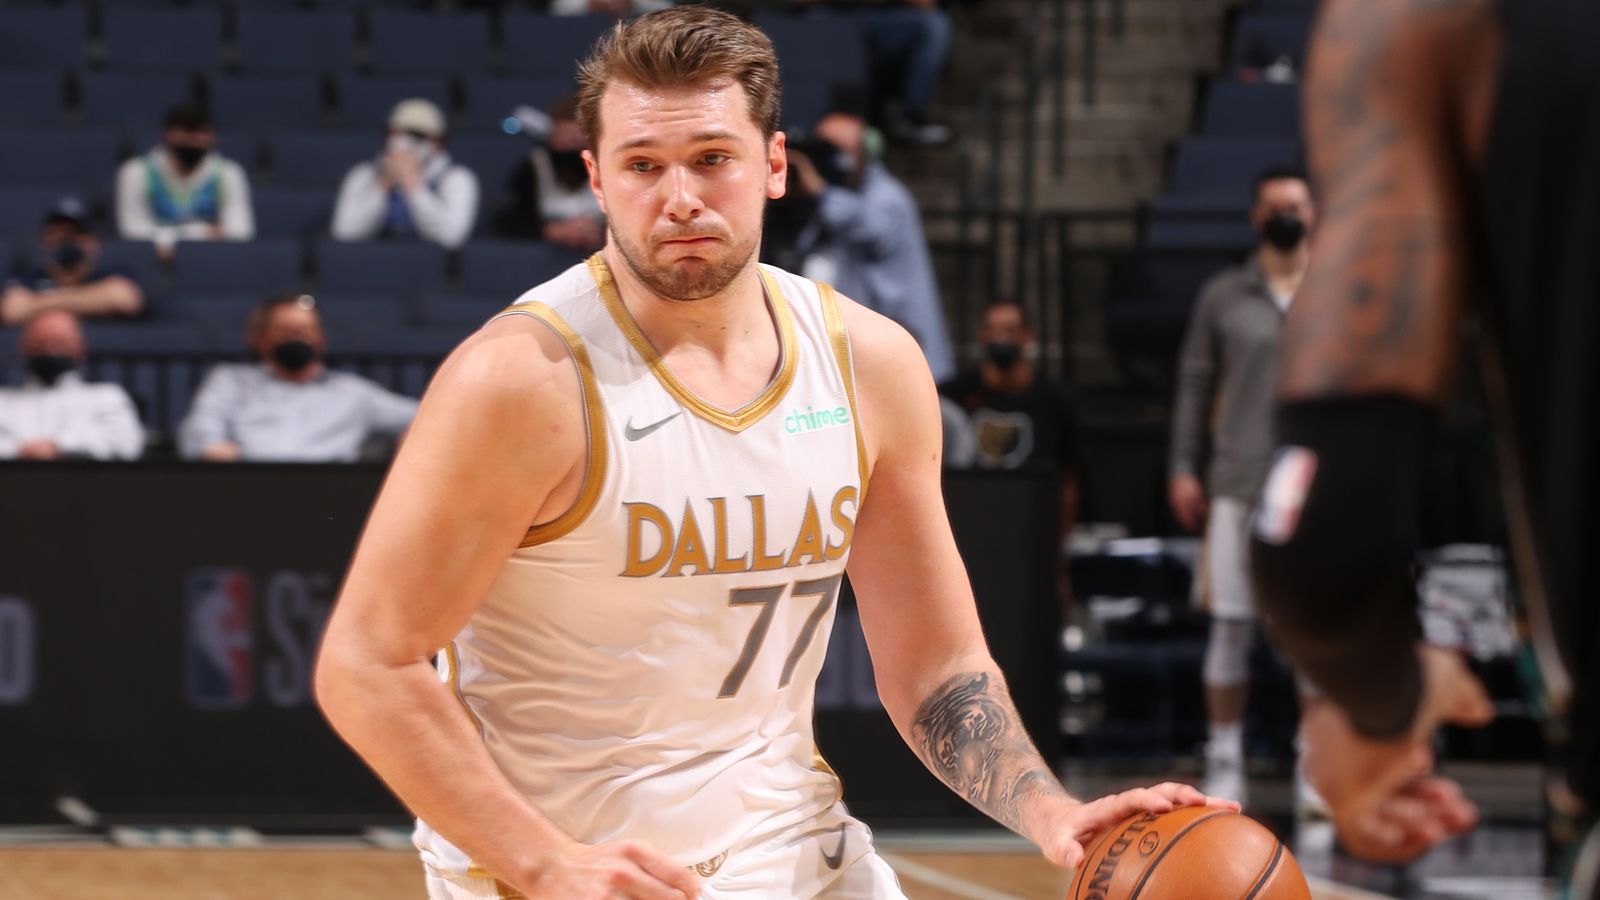 Luka Doncic Scores 50 in Friday's Mavericks' Win Over the Rockets